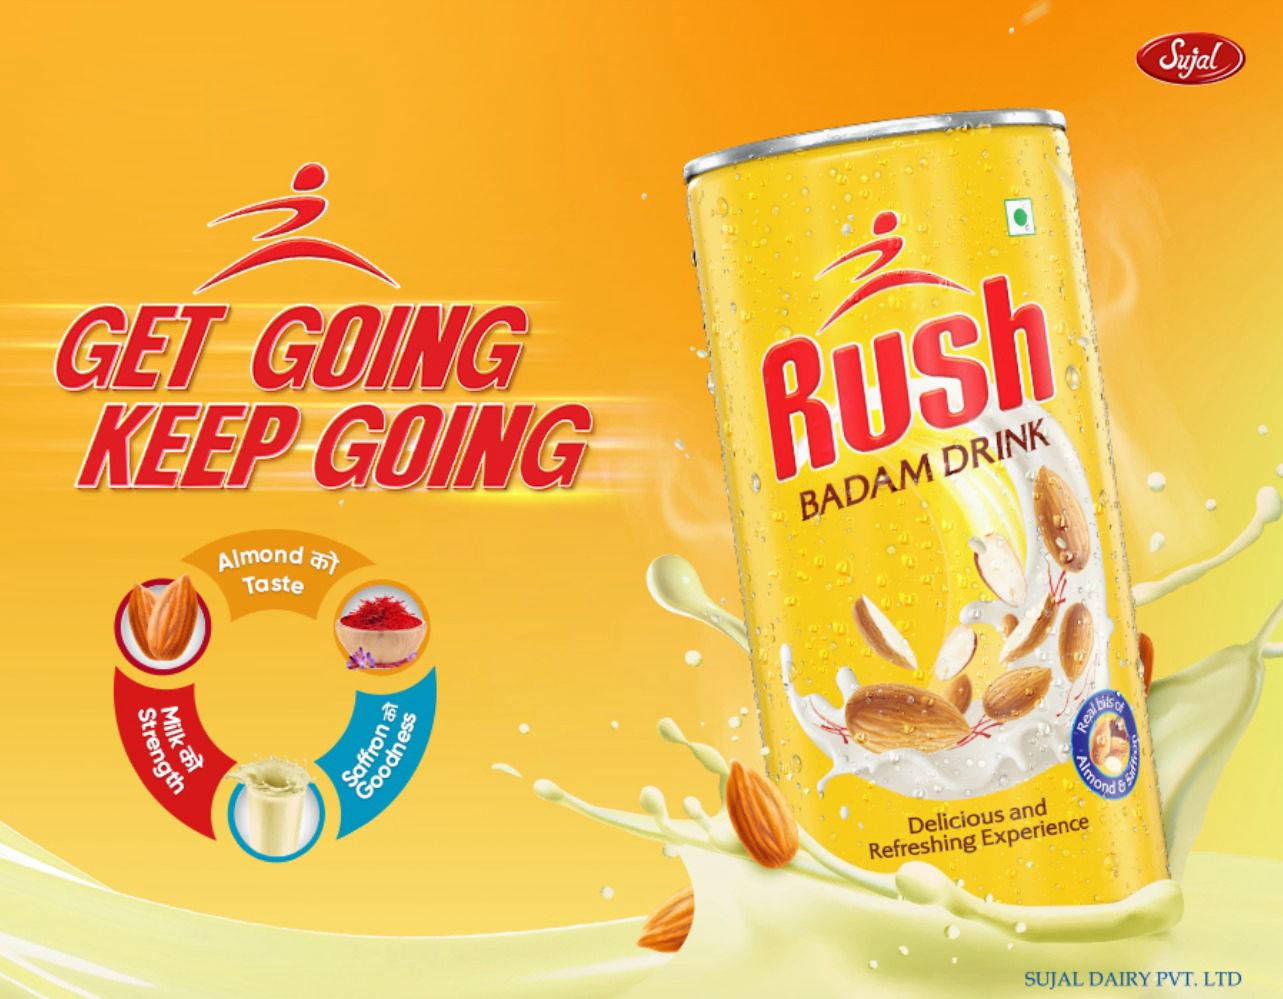 Sujal Dairy launches RUSH BADAM DRINK: